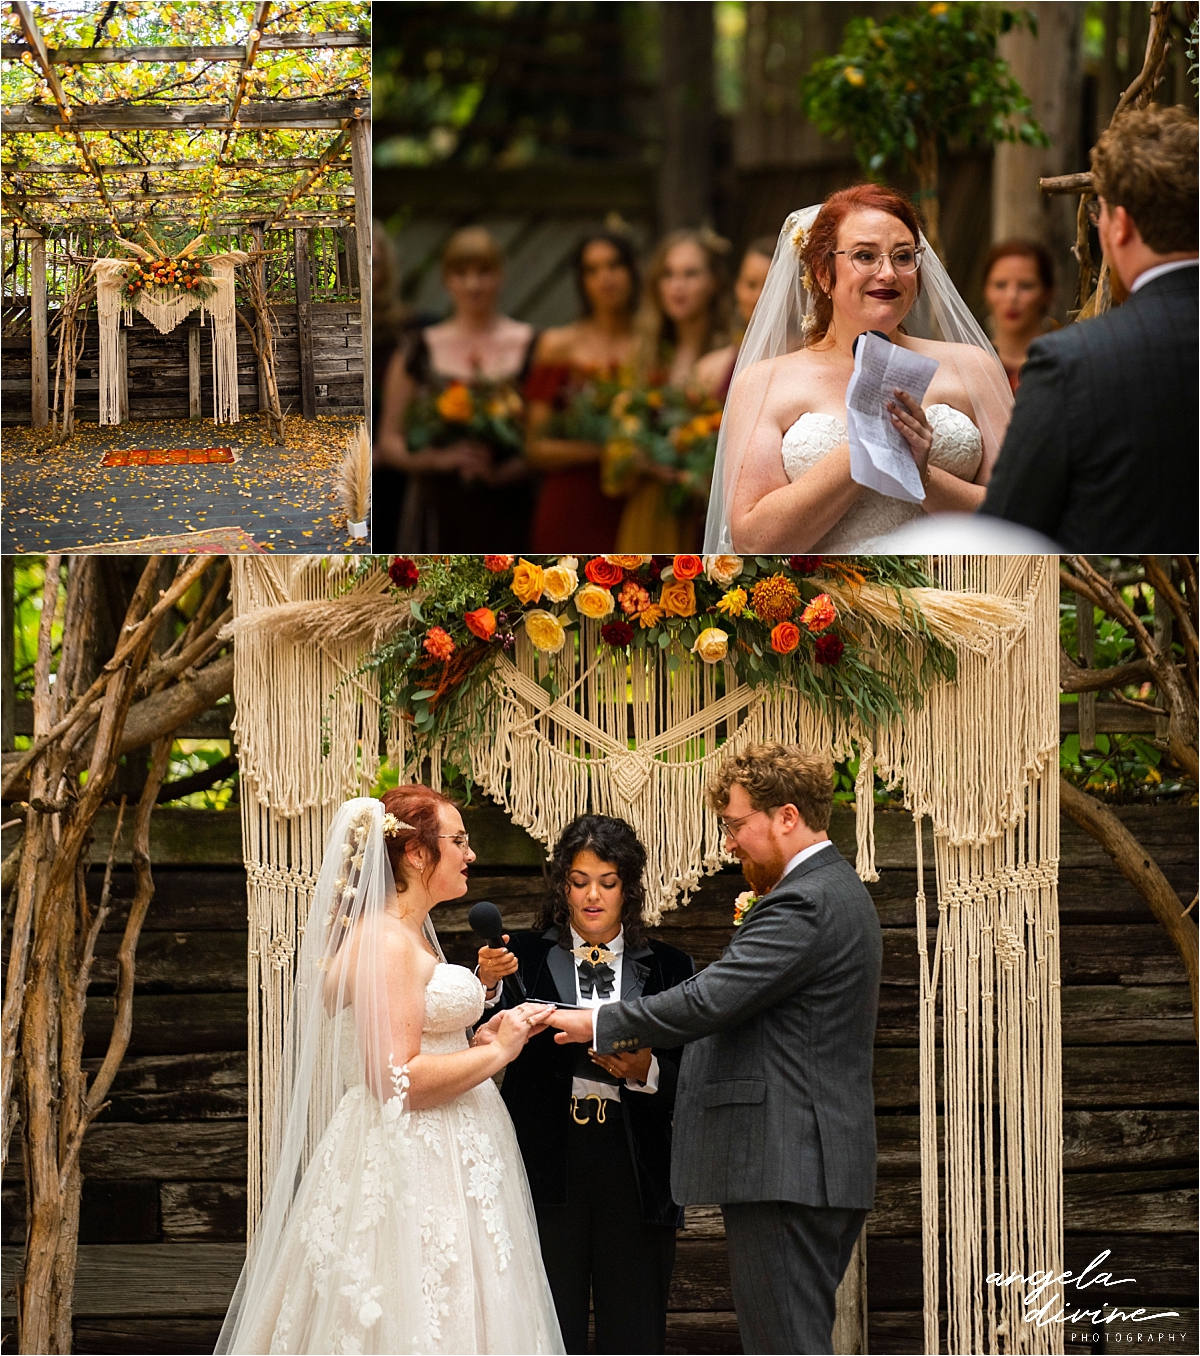 The Gardens of Castle Rock fall wedding exchanging vows